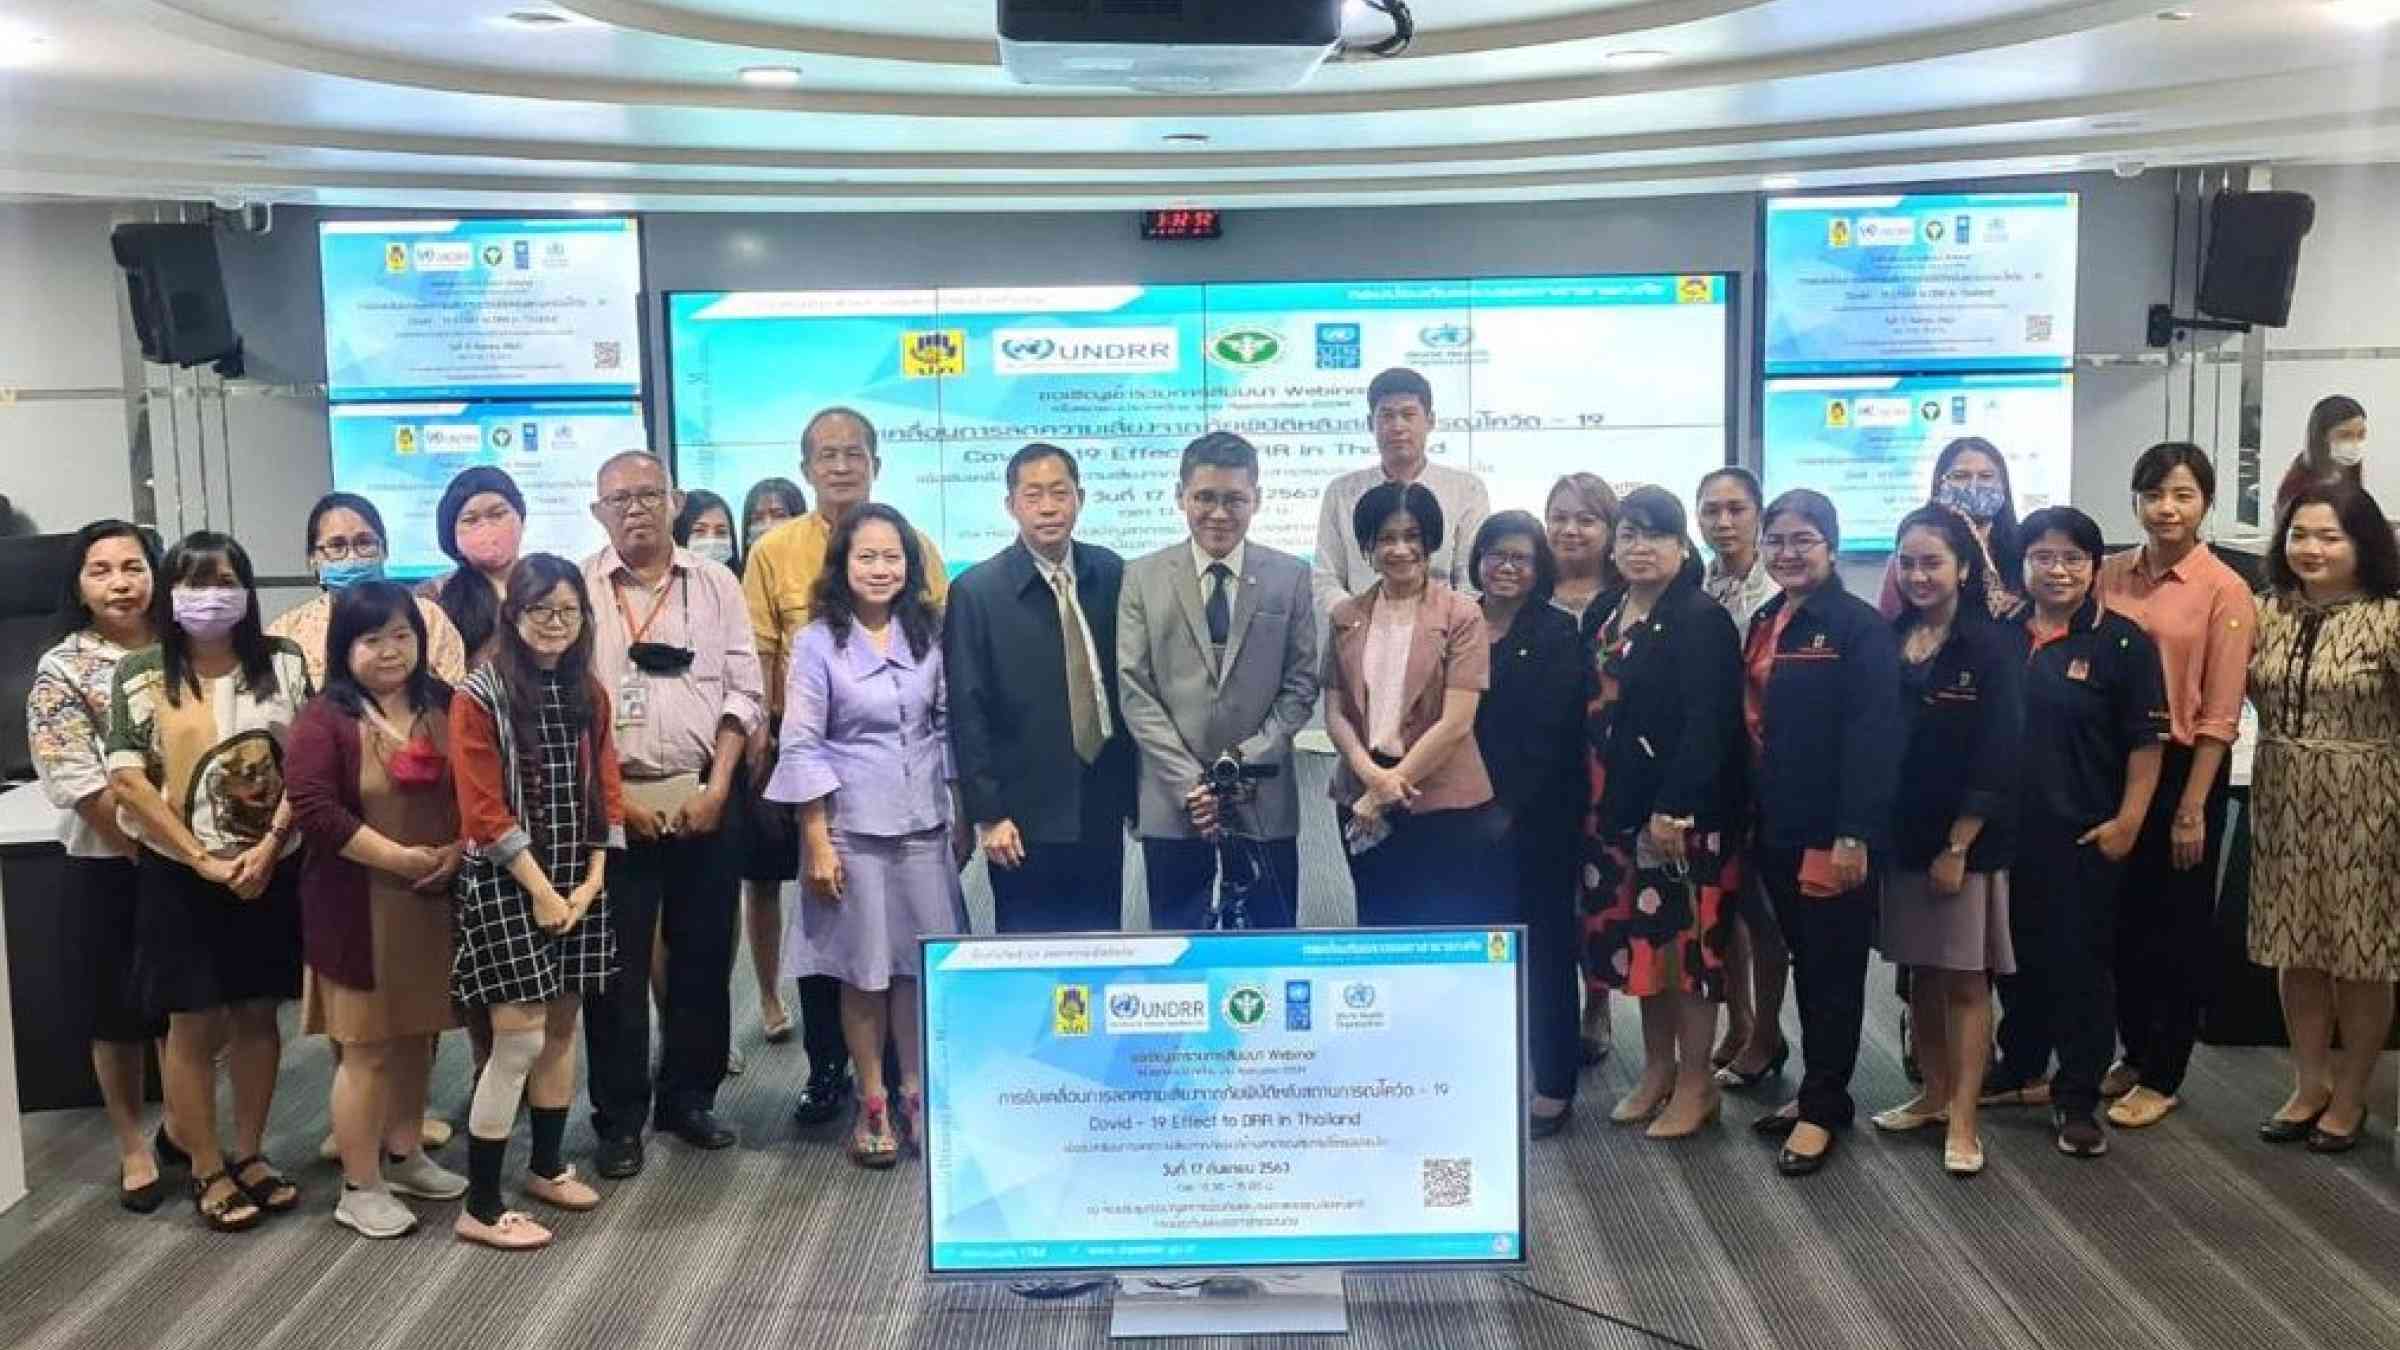 A group photo at DDPM headquarters in Bangkok, Thailand, in the aftermath of the webinar which was attended by over 200 officials from across the Government of Thailand.